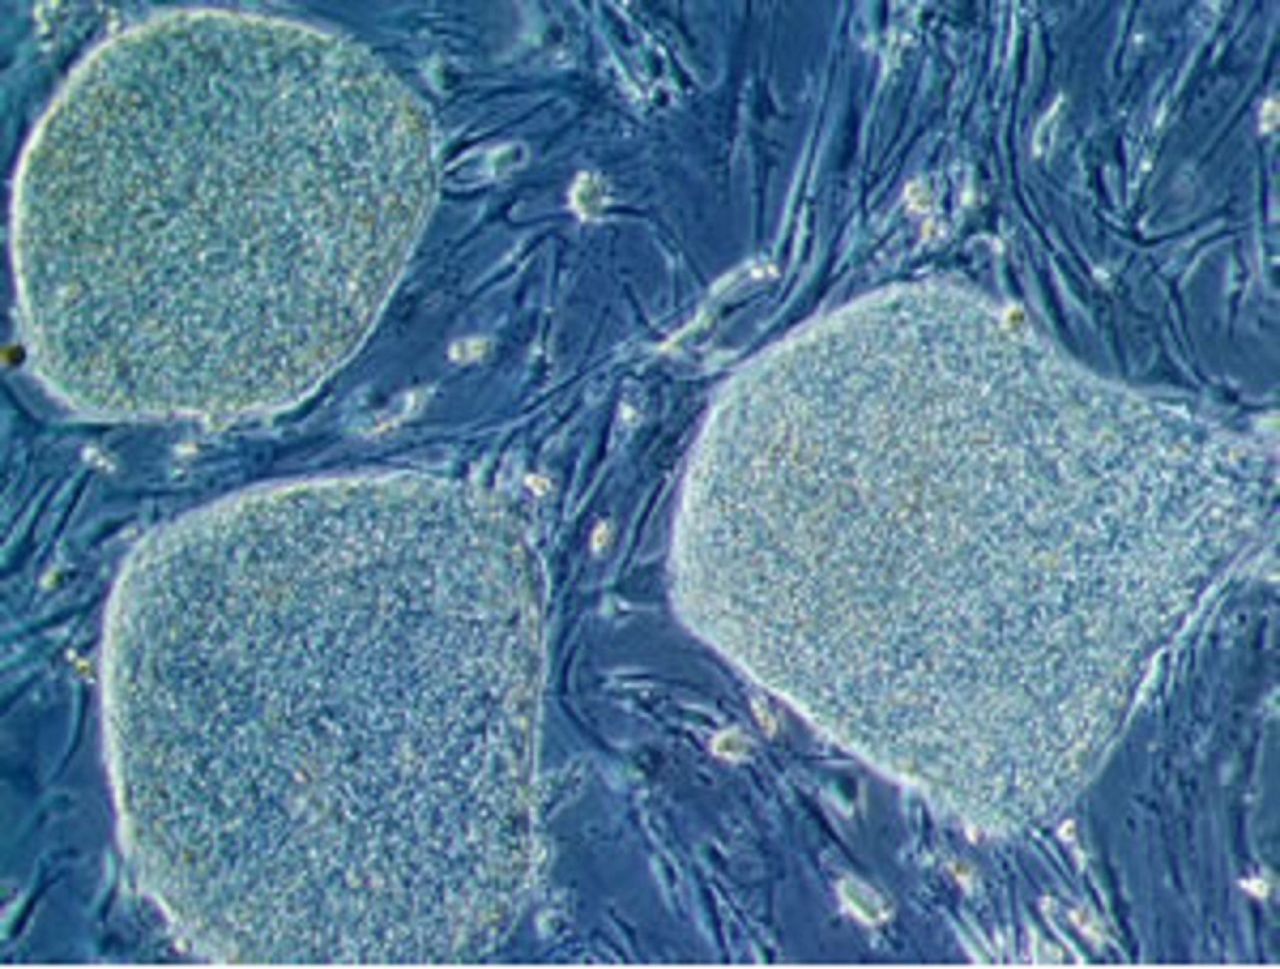 Stem cells offer the potential to be cultivated to become many other cell types in the body. Their ability to form cells within the eye could be key to reversing blindness. Pictured,  a colony of human embryonic stem cells under the microscope. 